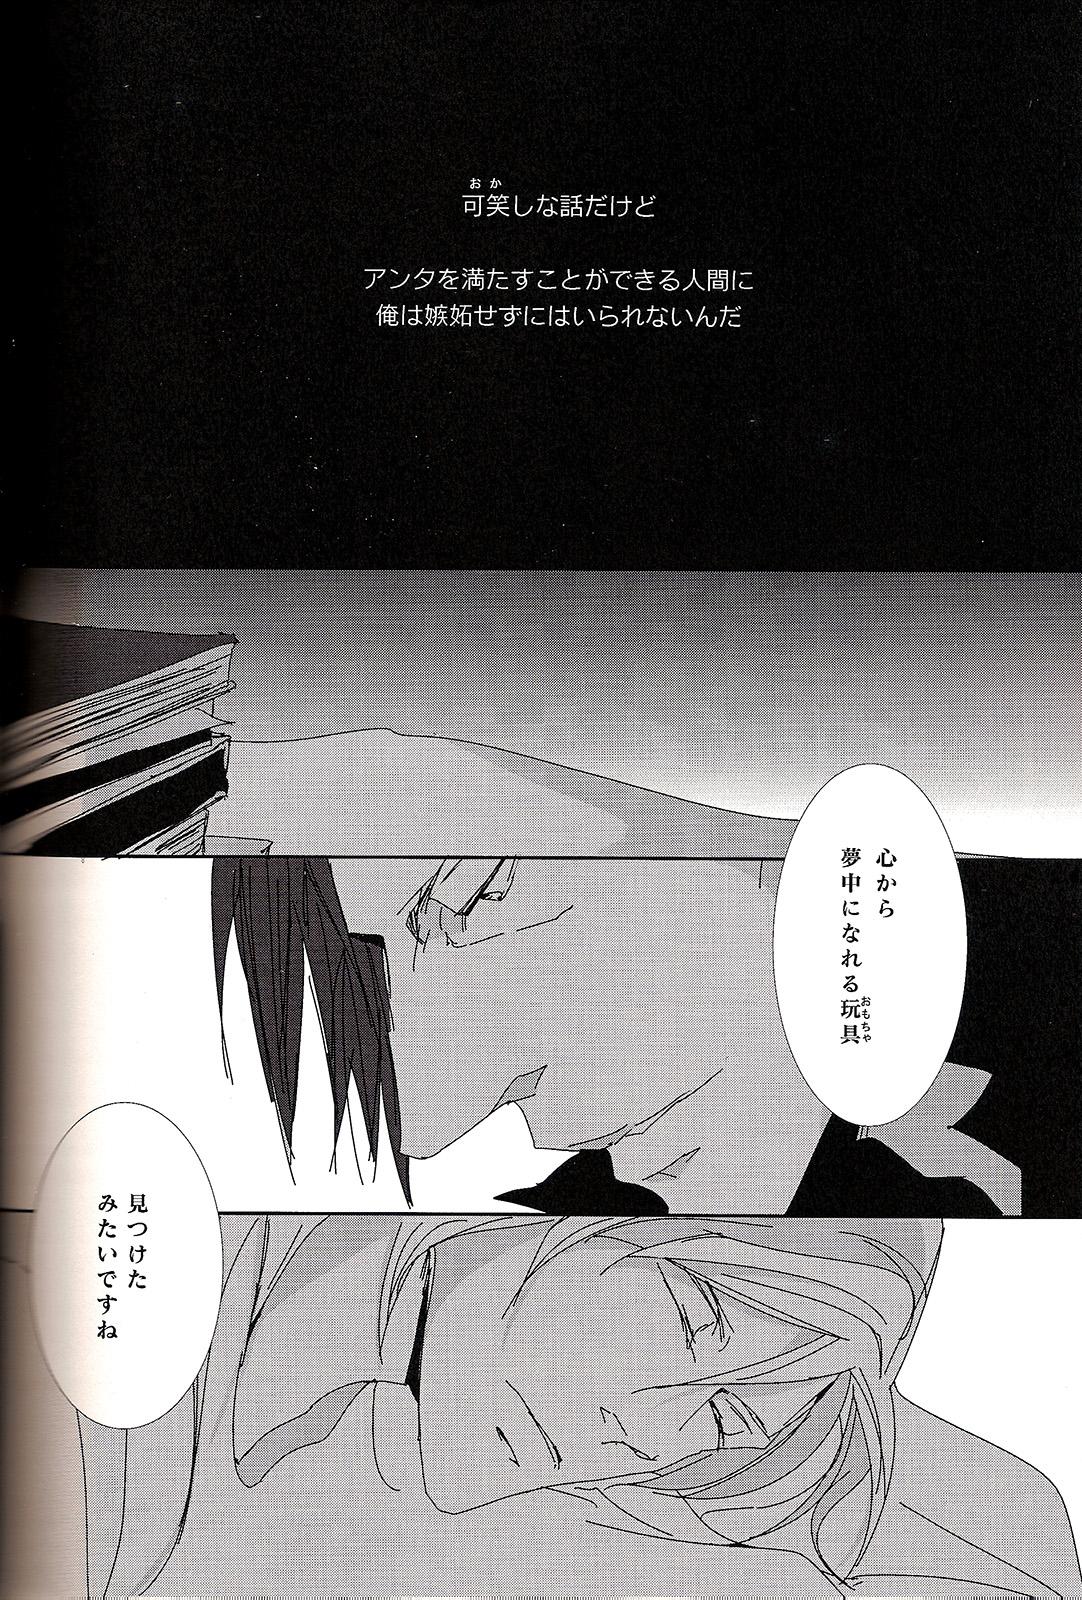 Older Sweet or Spicy - Psycho-pass Teensex - Page 20